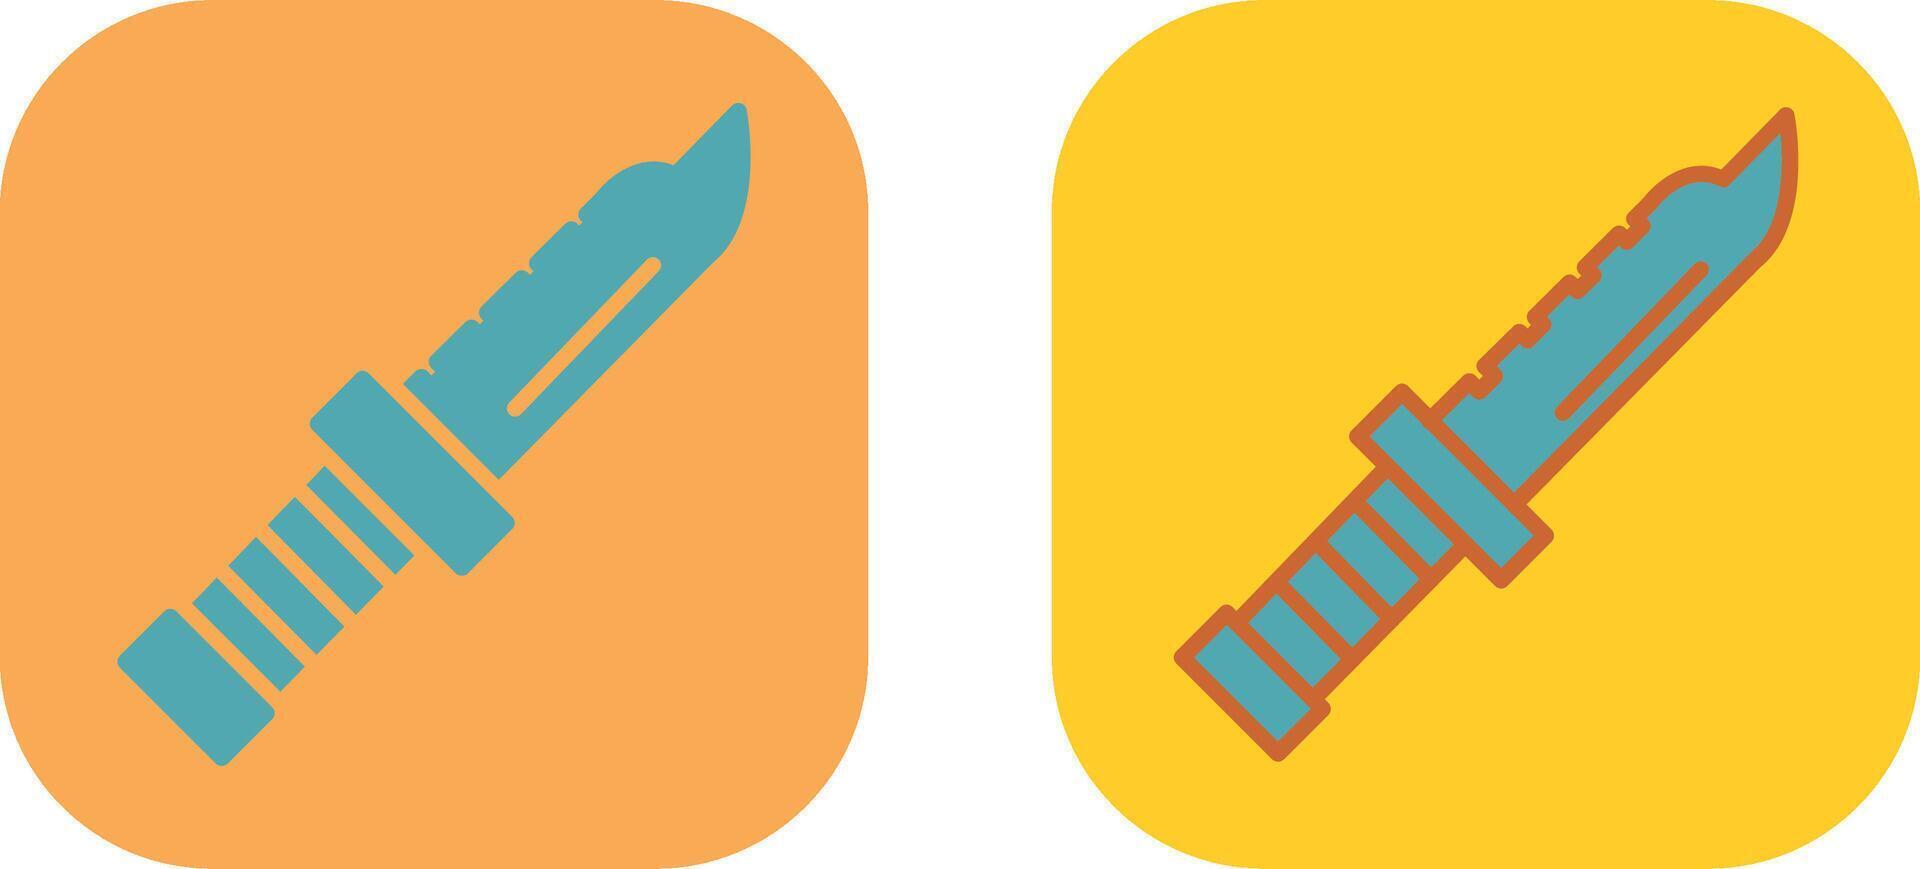 Army Knife Icon vector